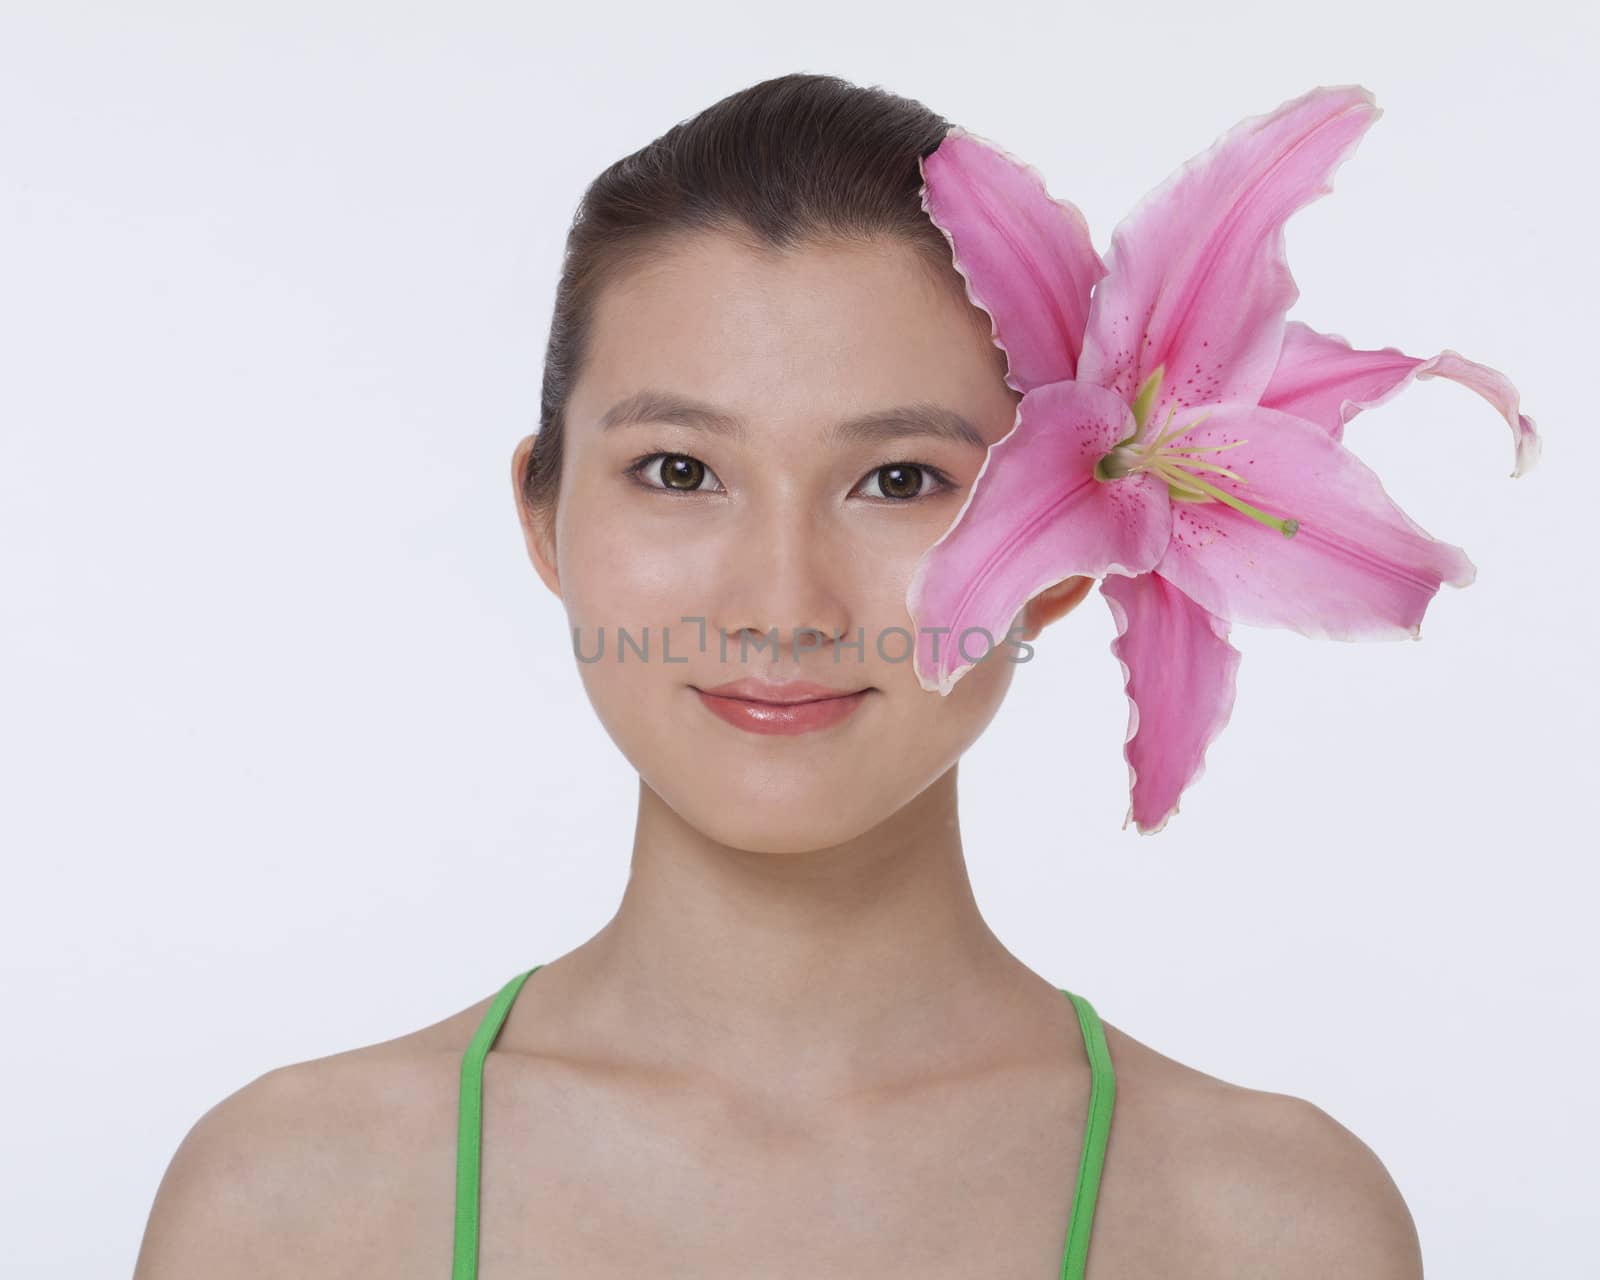 Portrait of young, smiling, beautiful woman with a large pink flower tucked behind her ear, studio shot by XiXinXing